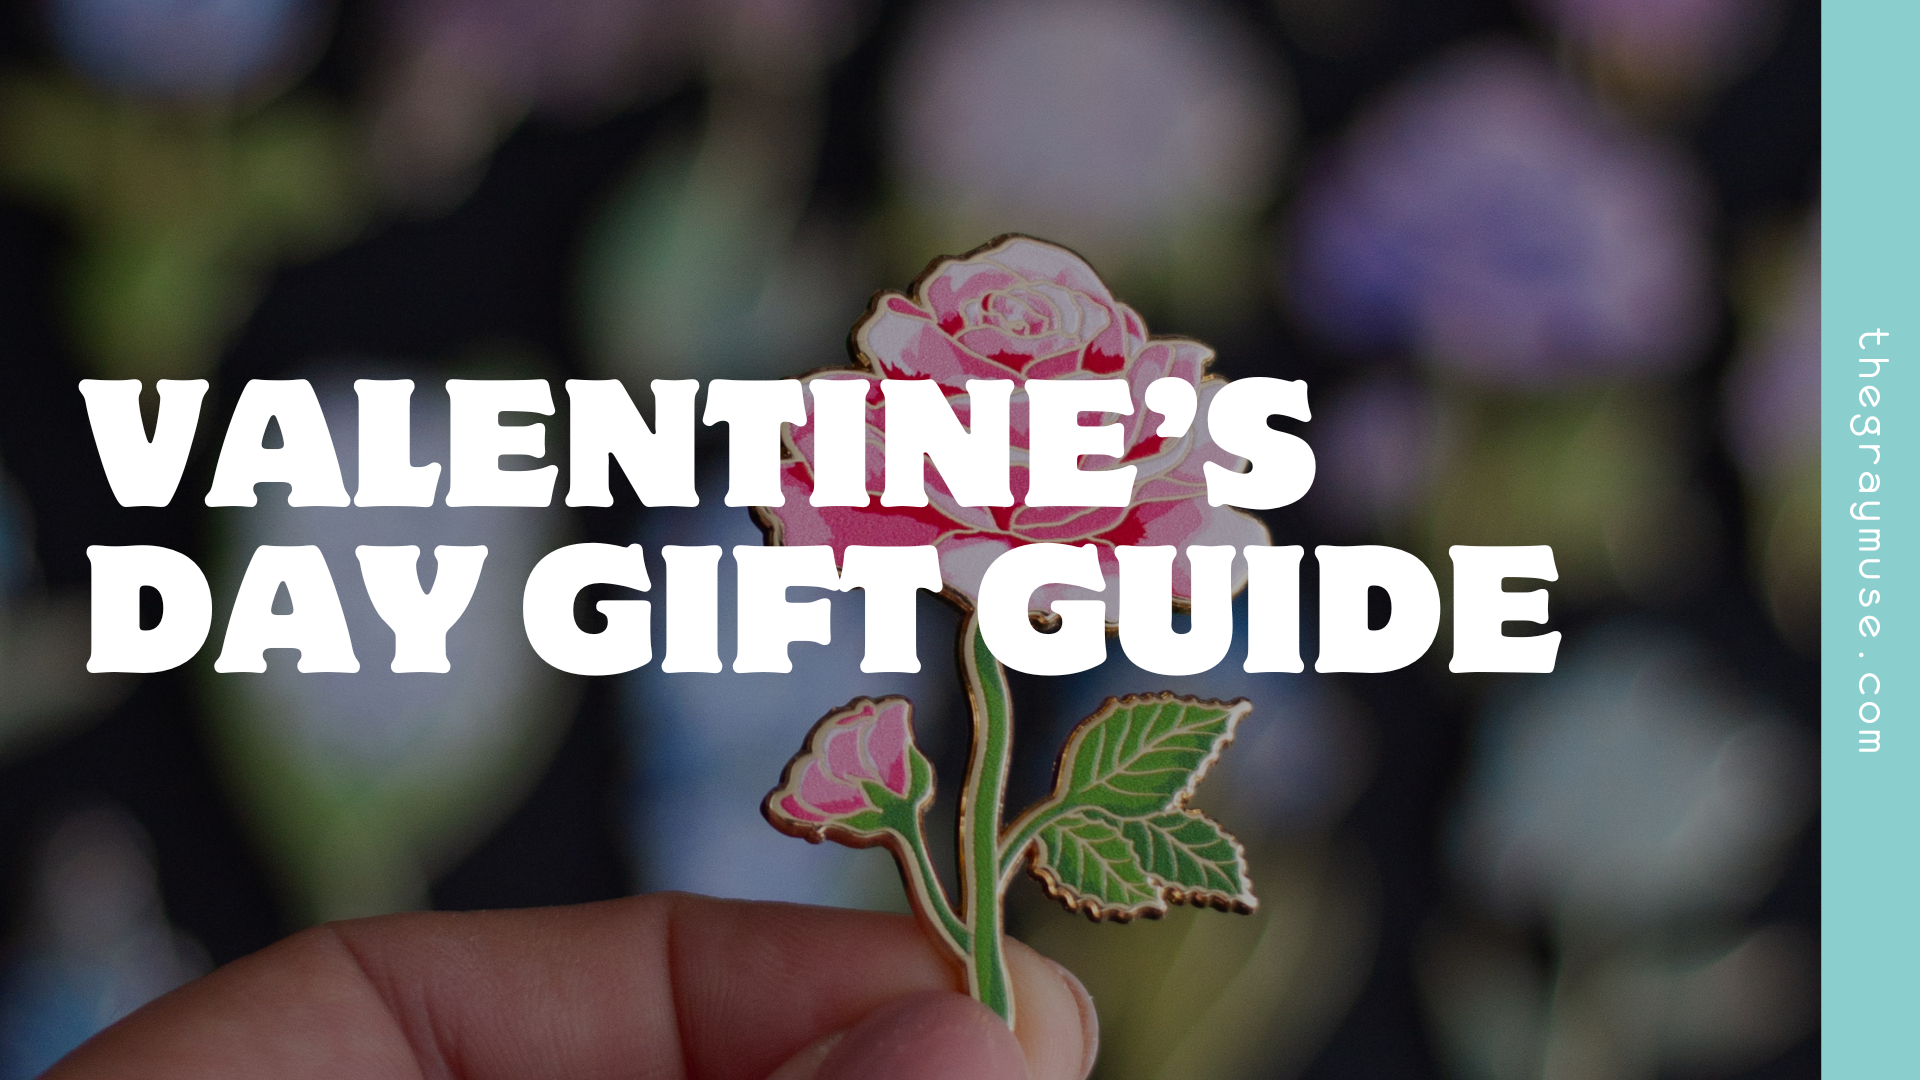 Valentines Day Gift Guide